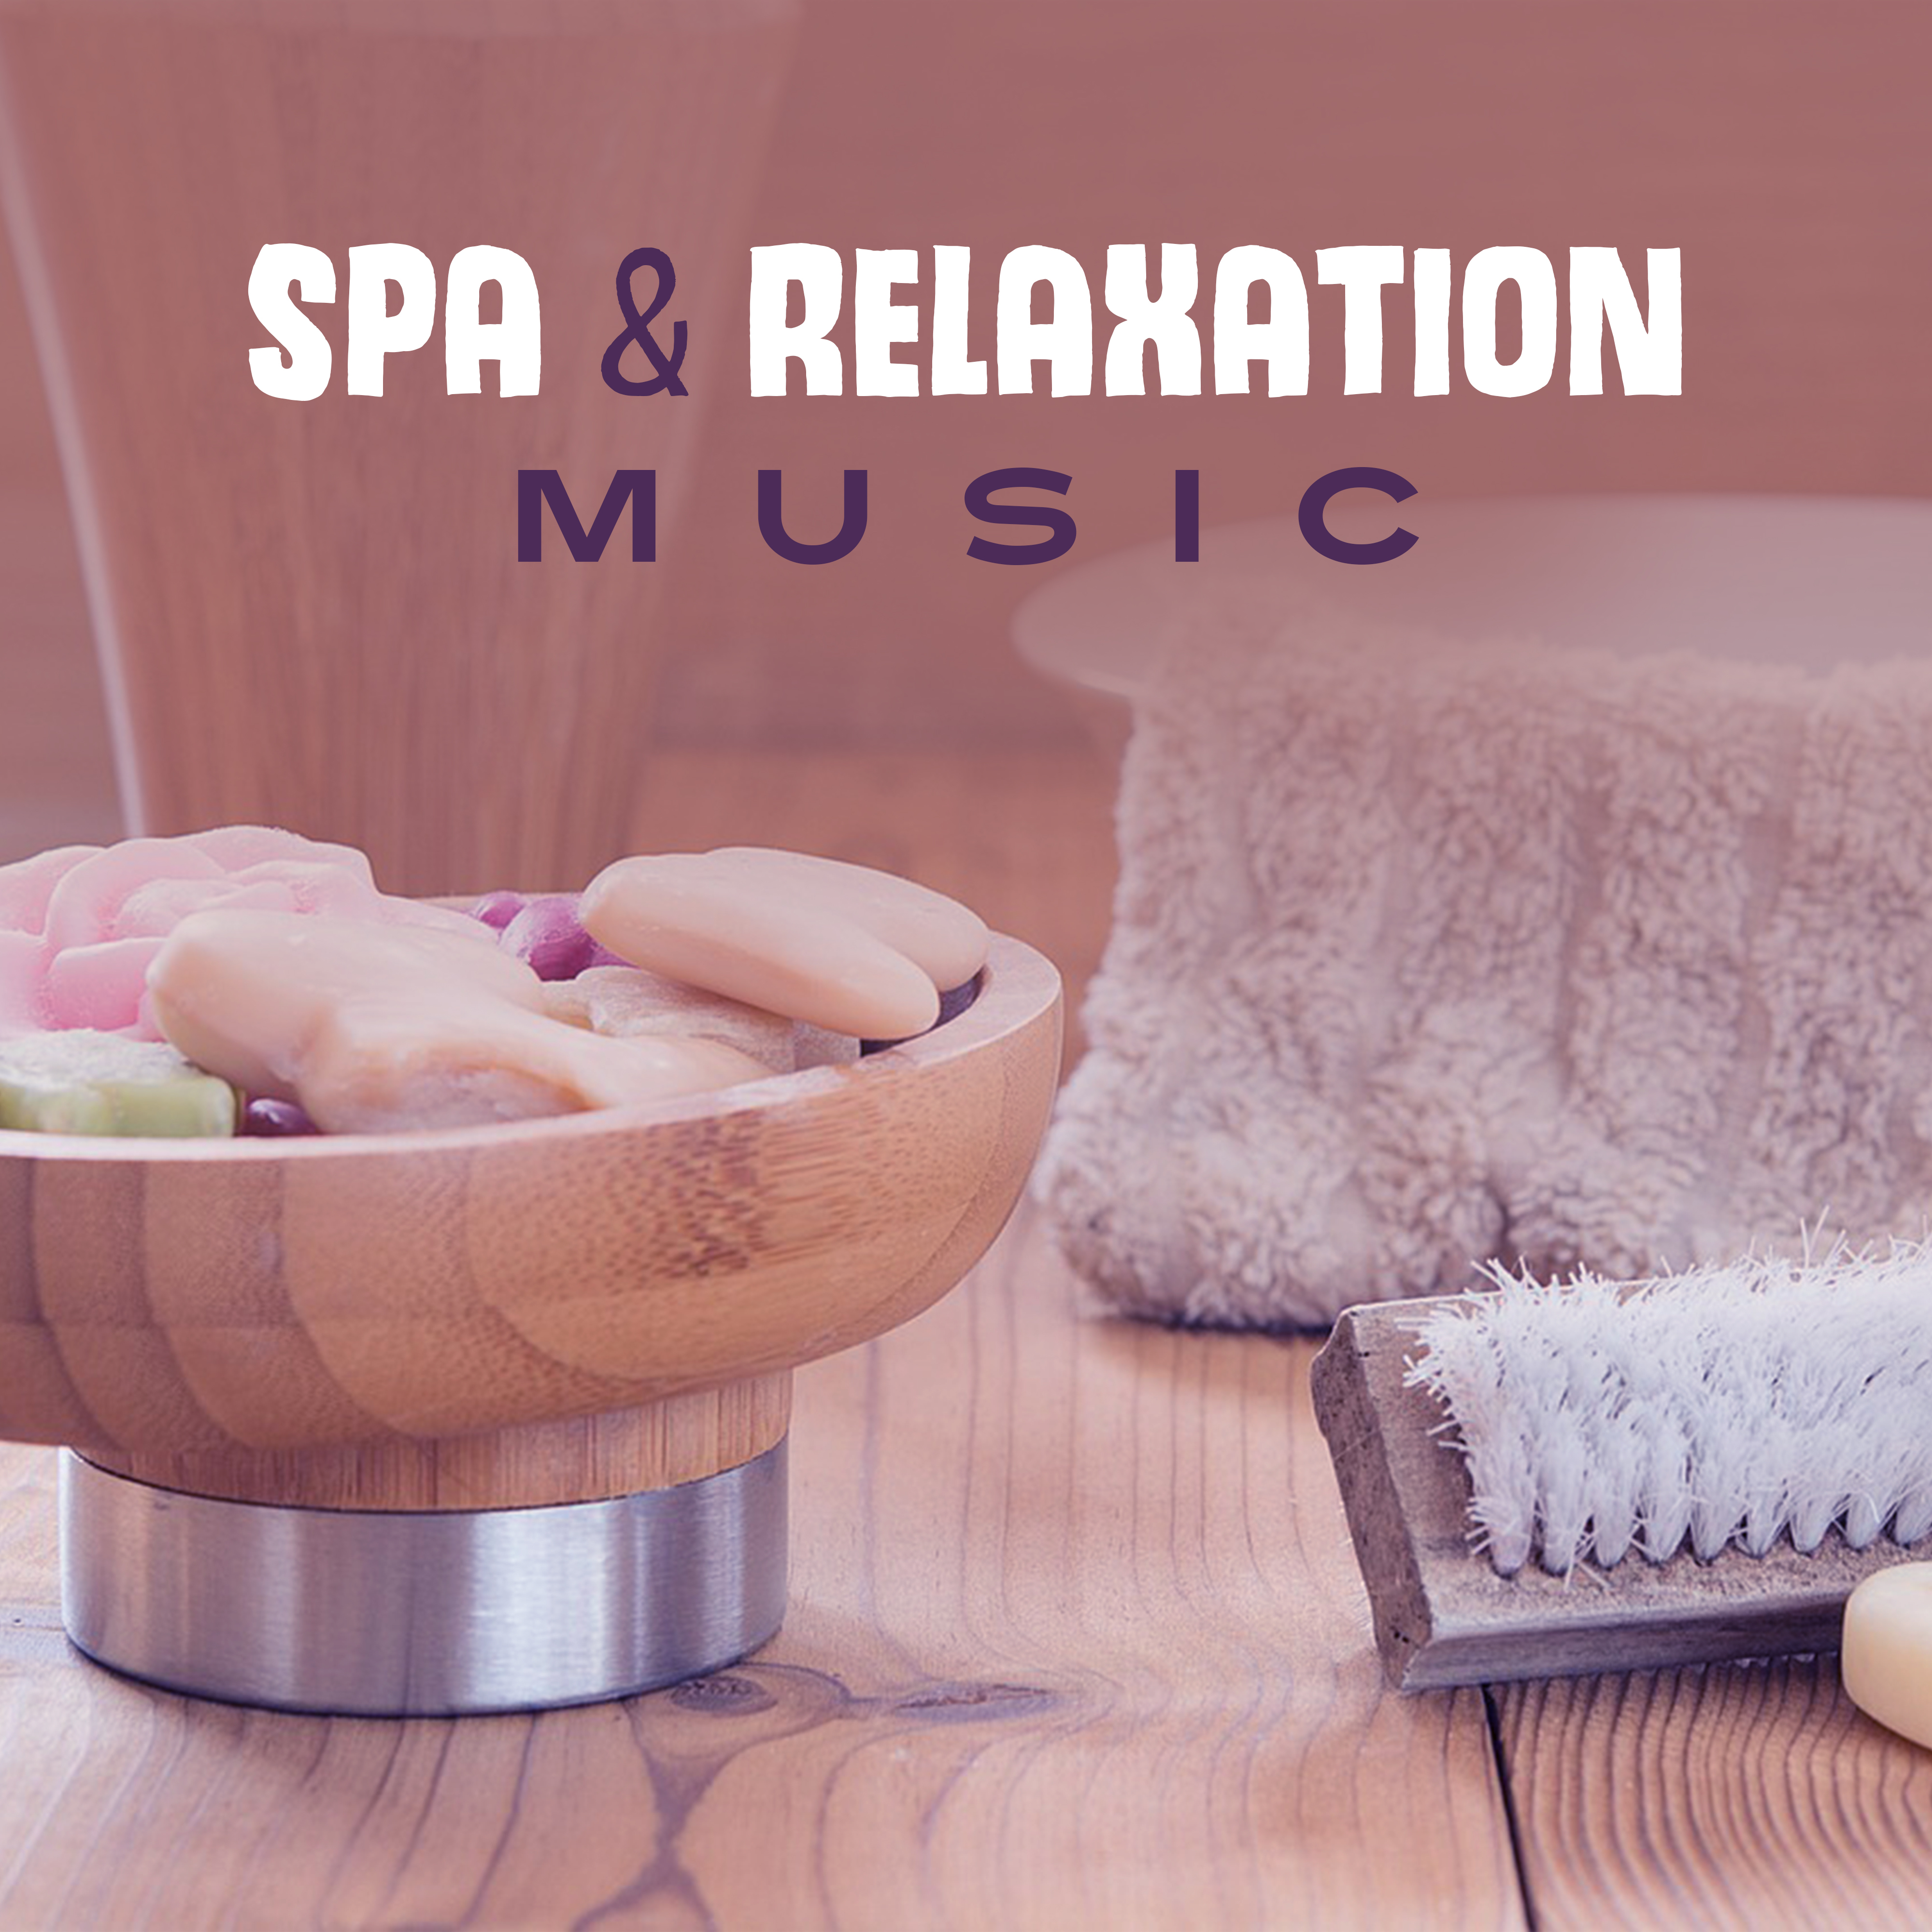 Spa  Relaxation Music  Music for Spa, Rest with Nature, New Age Calmness, Chill Yourself